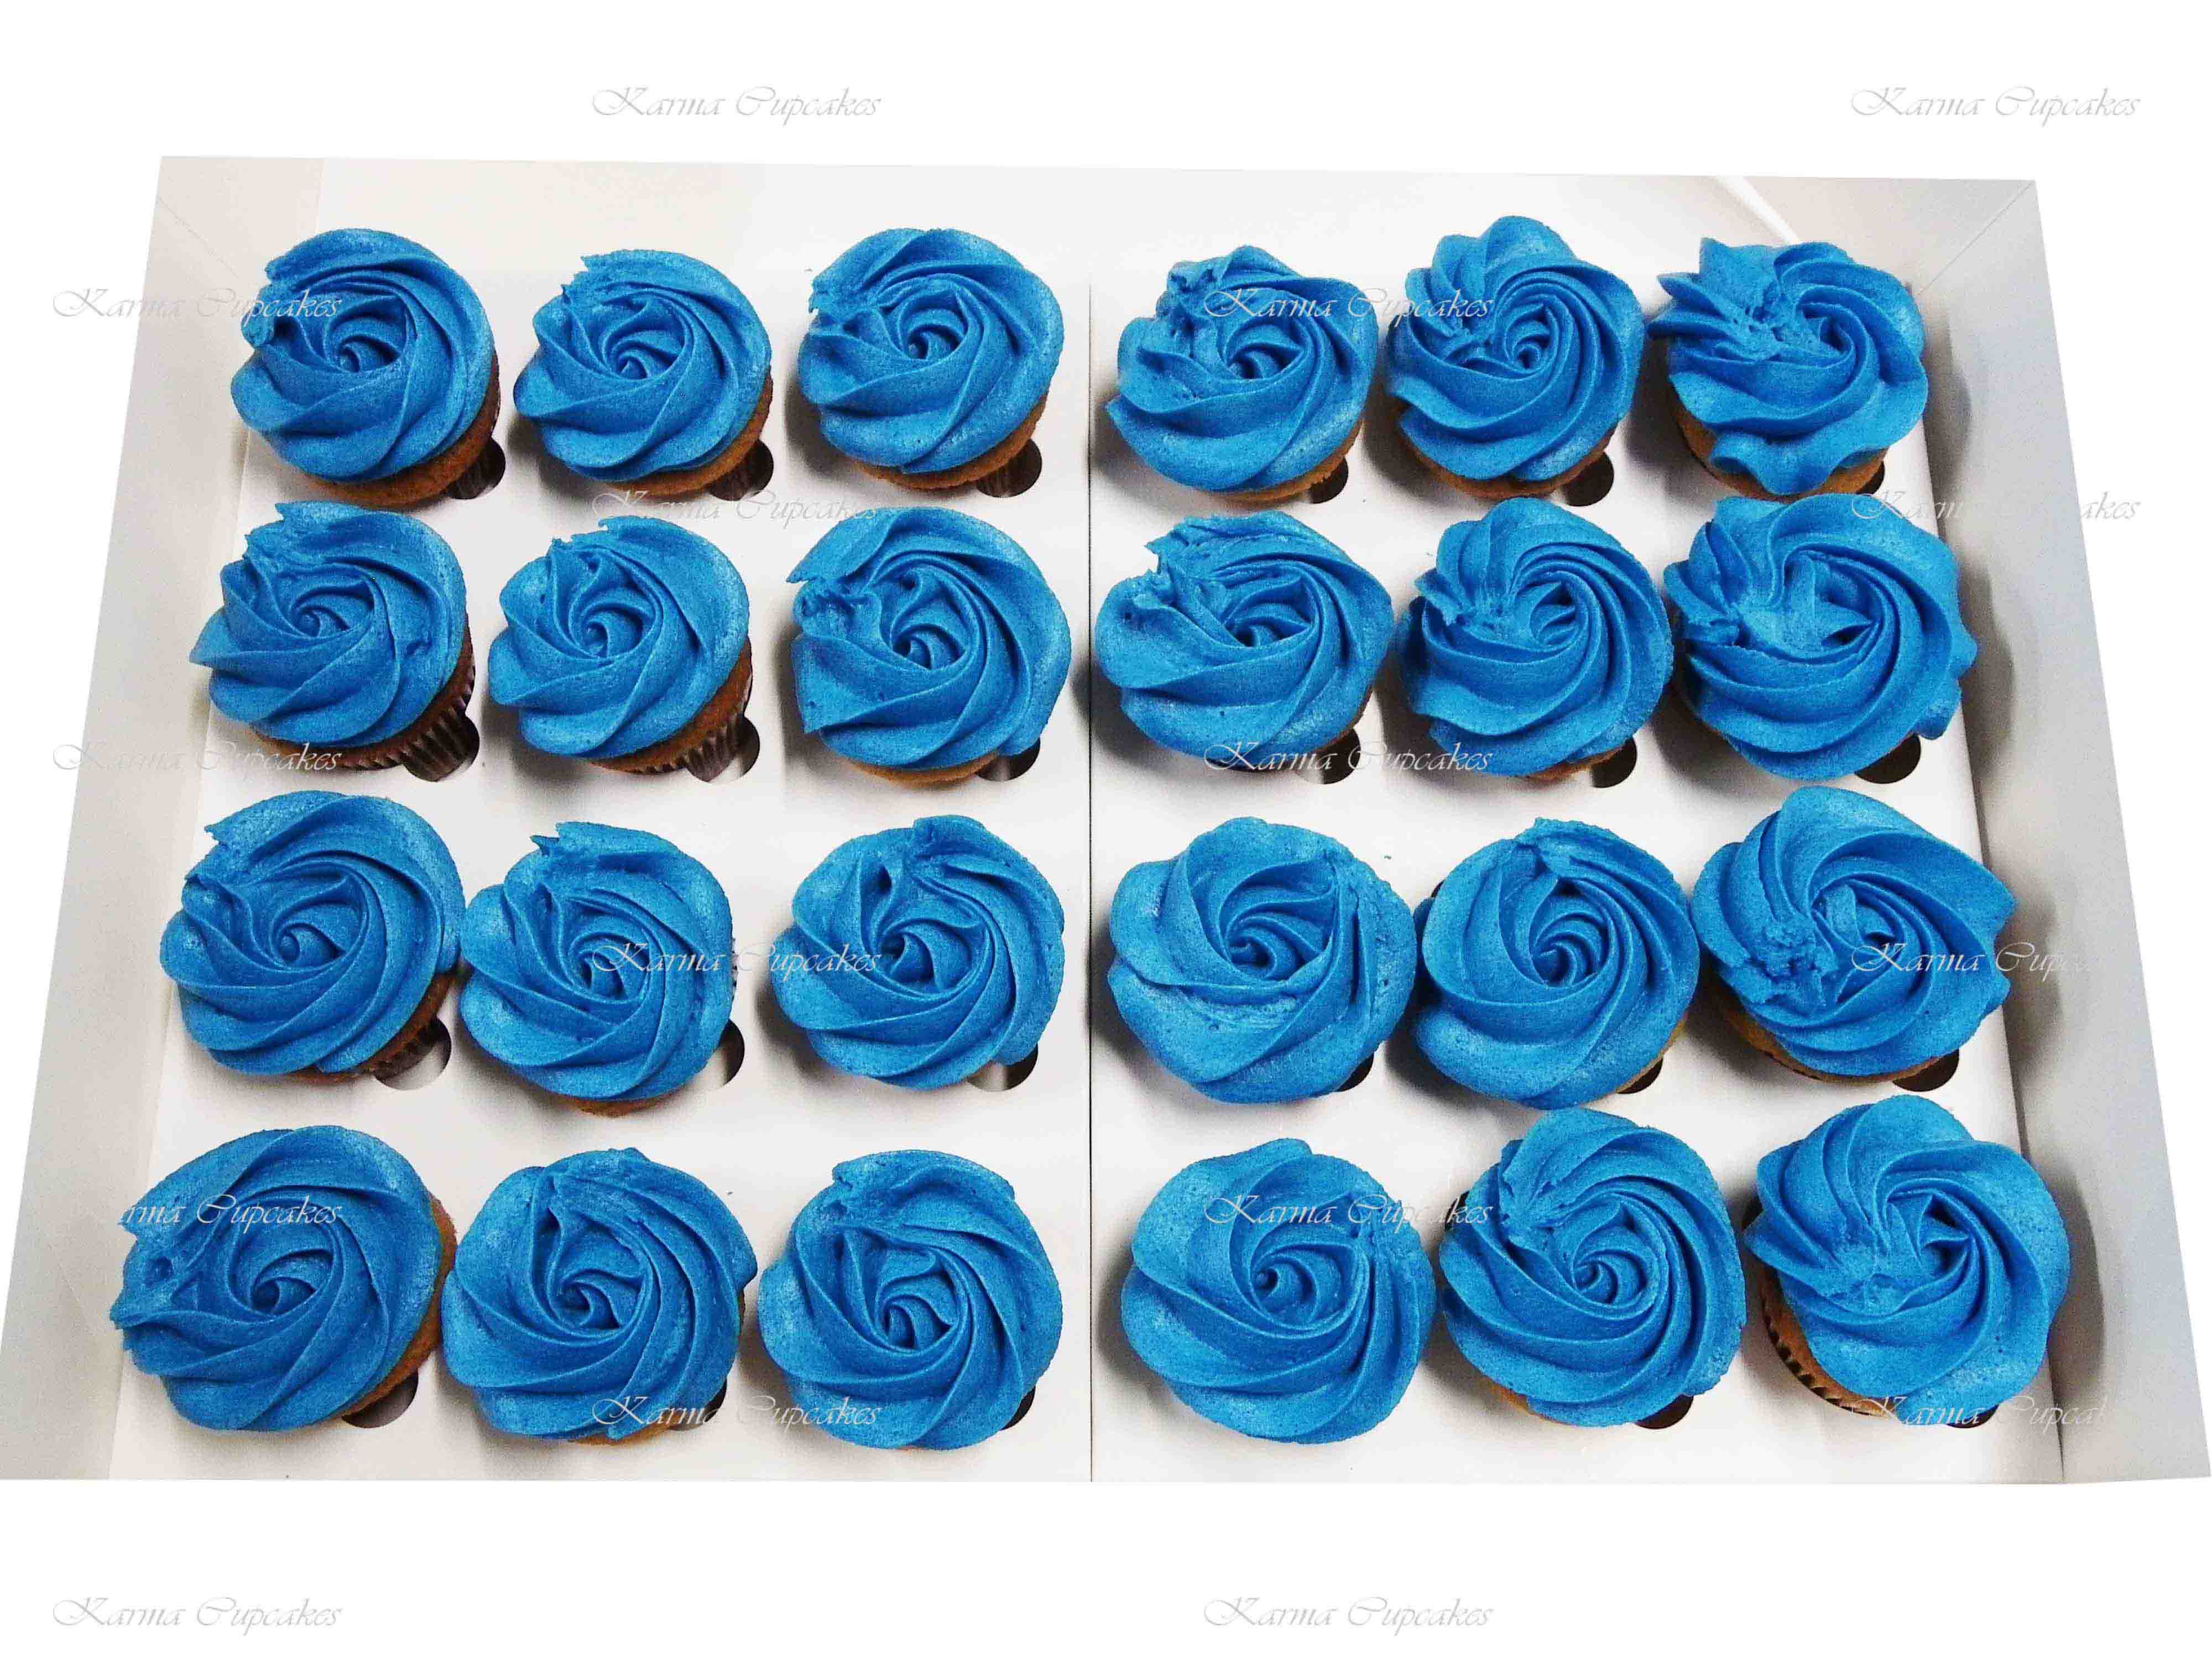 Classic Ombre Rose Swirl High Tea Cupcakes - choose your colour